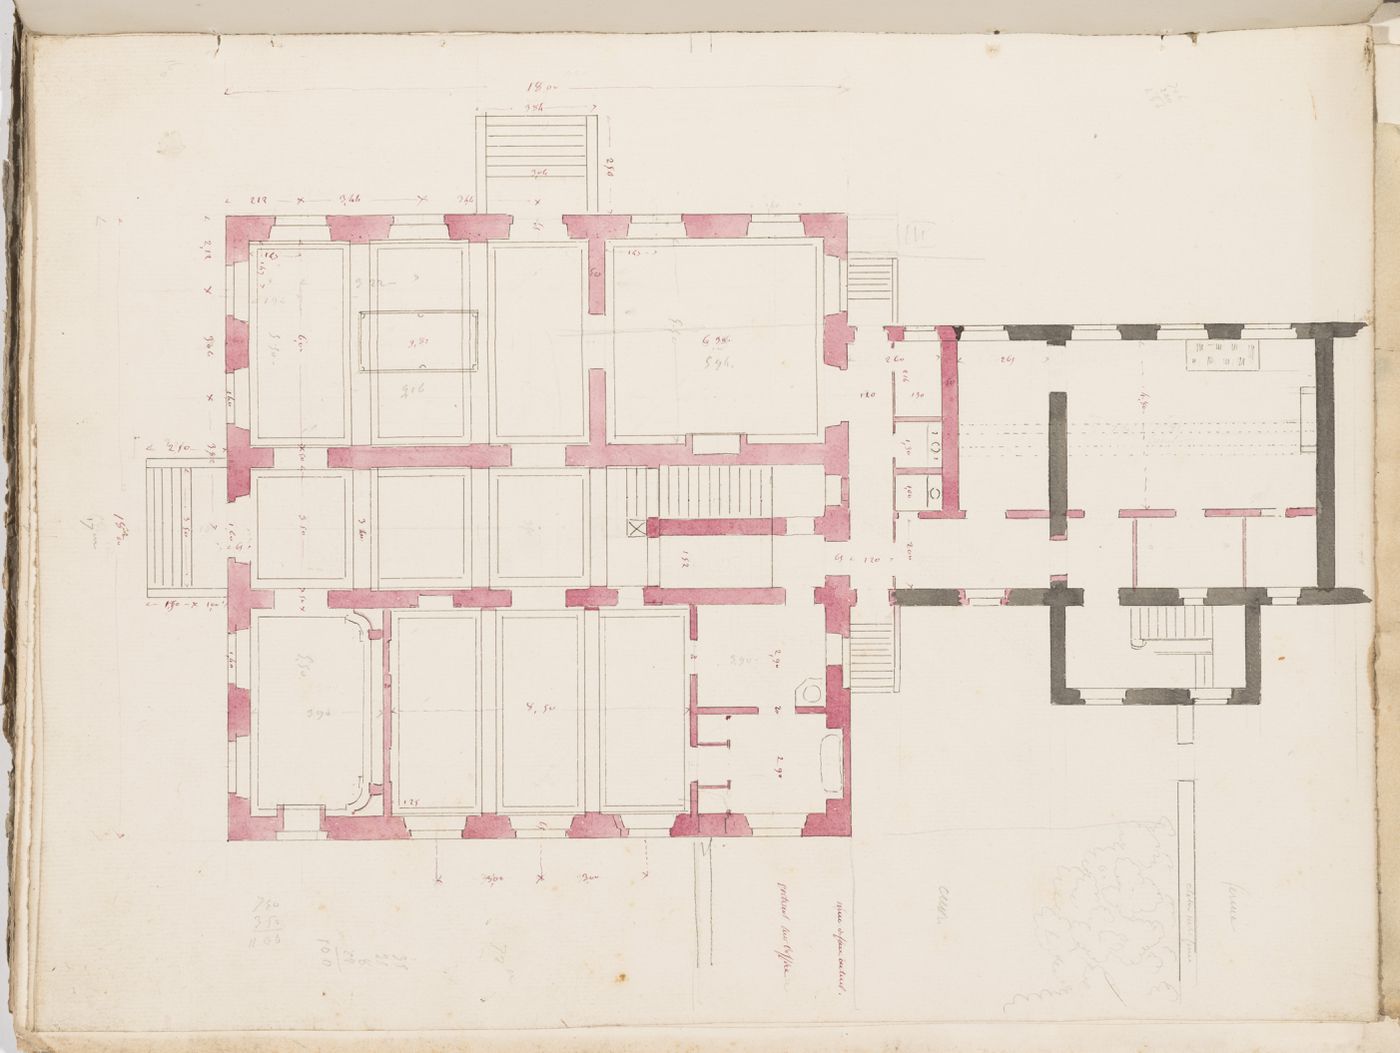 Project no. 8 for a country house for comte Treilhard: Ground floor plan